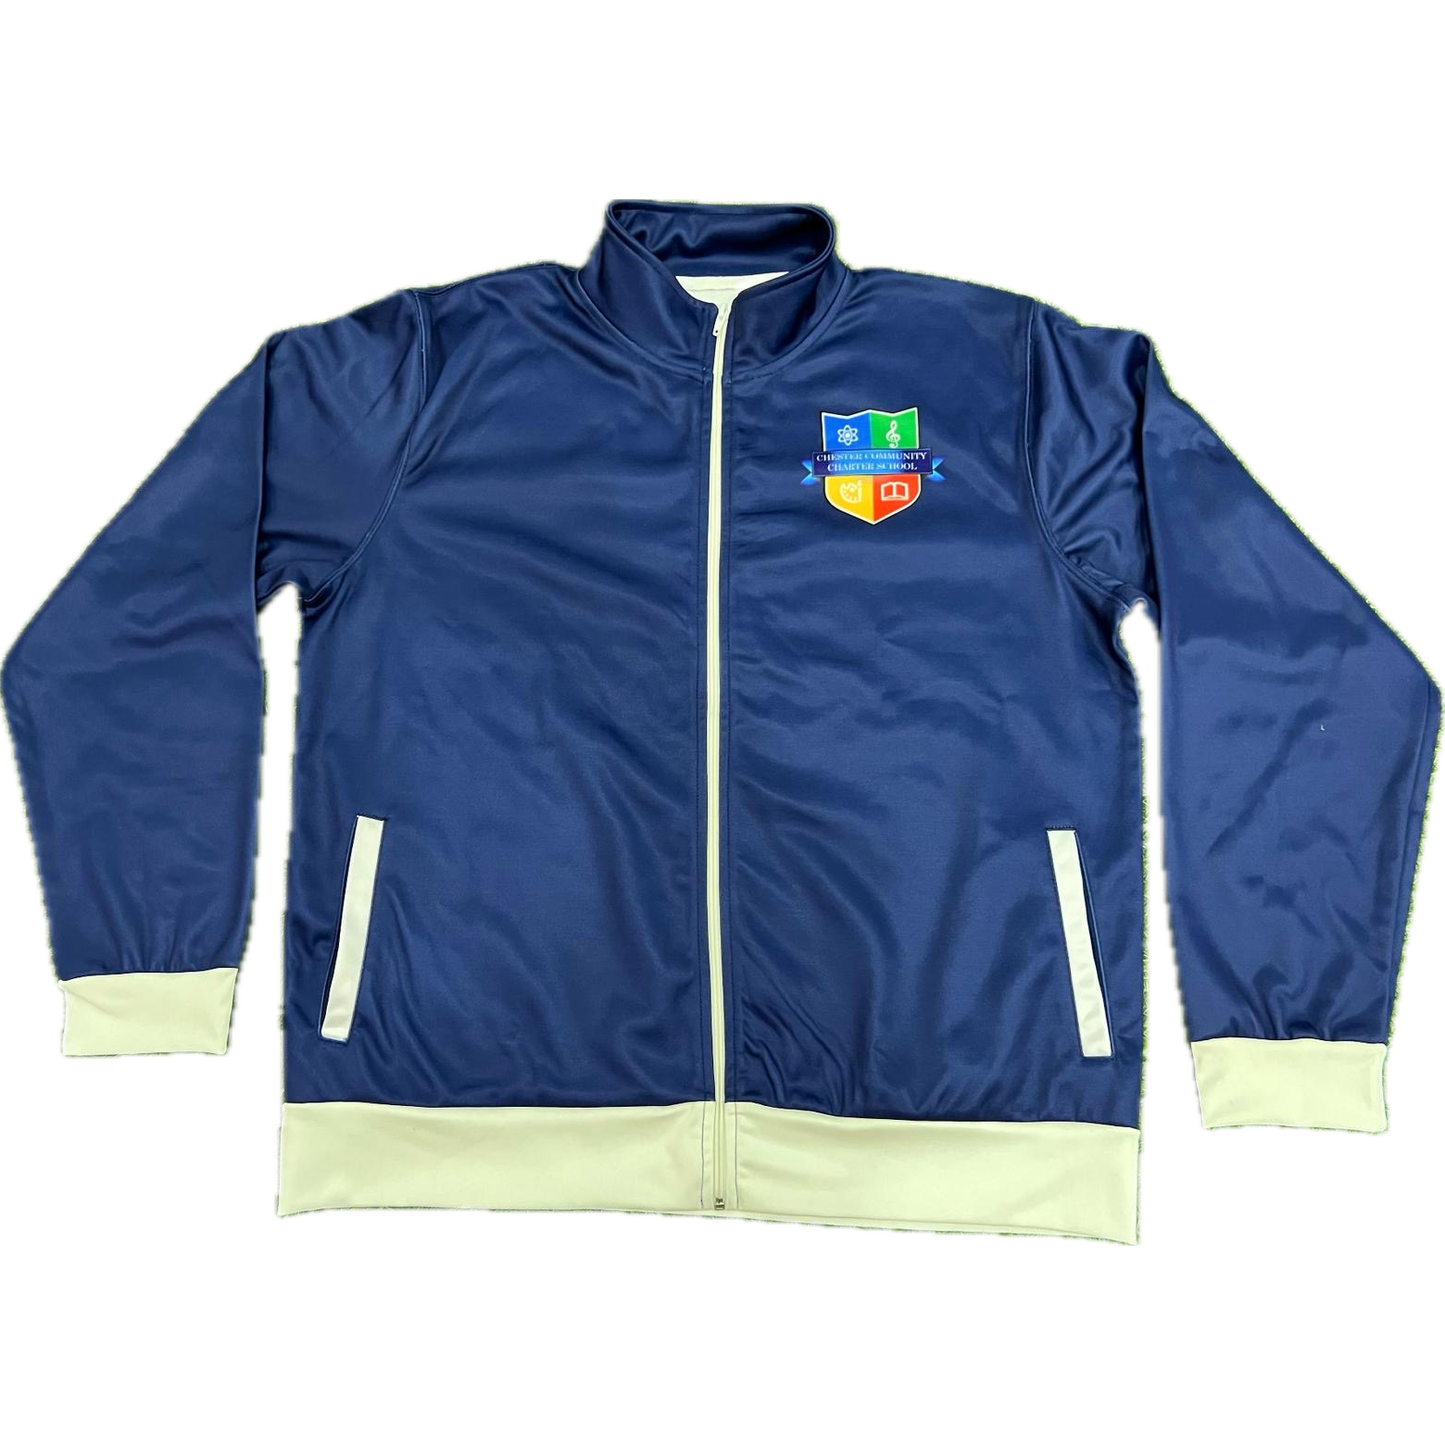 CHESTER ACTIVE JACKET (919CHES)